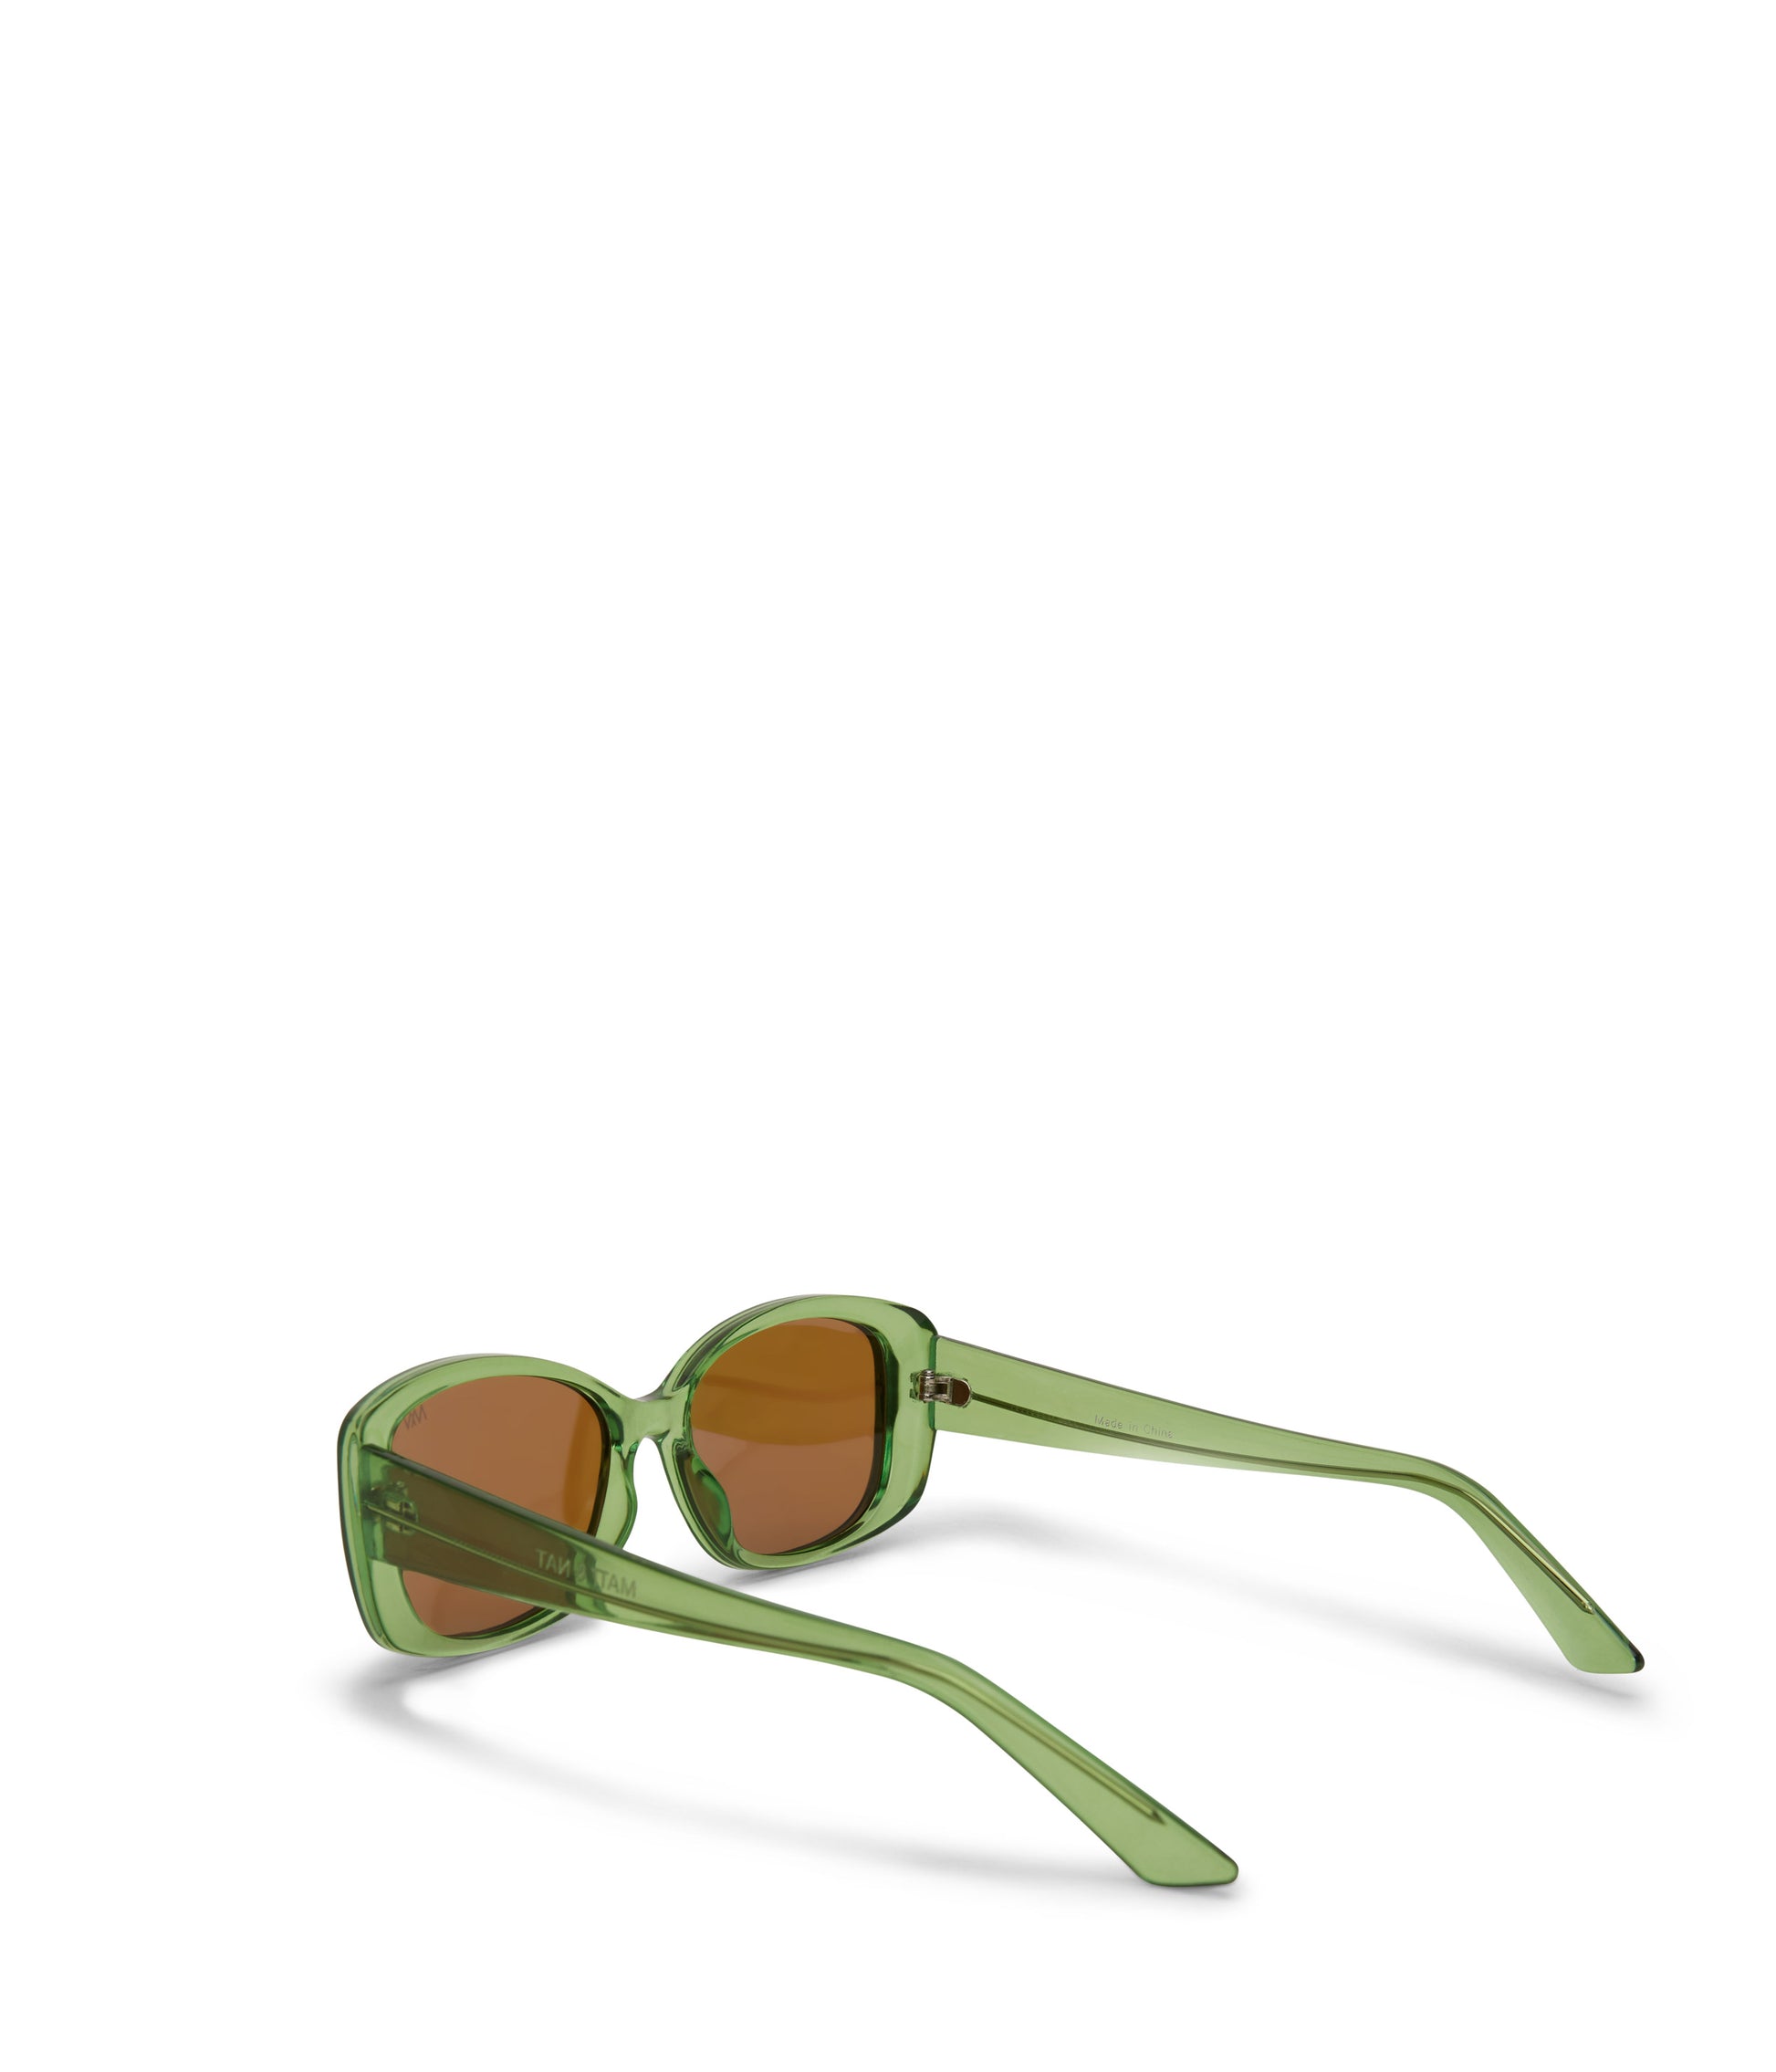 NORR Square Sunglasses | Color: Green - variant::green